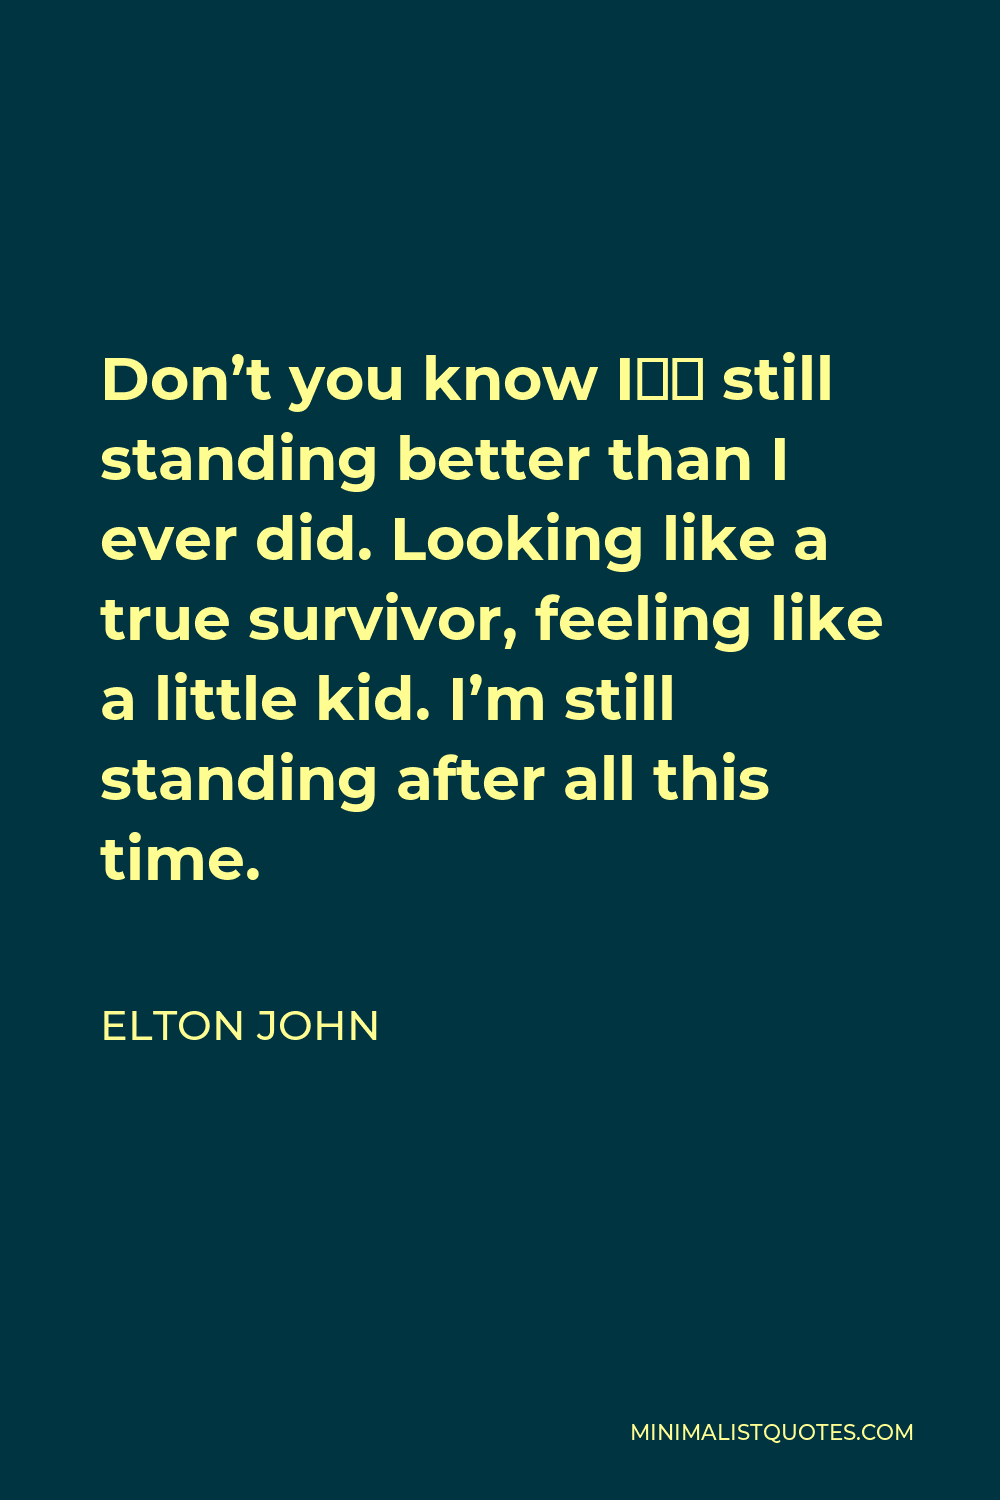 Elton John Quote Don T You Know I”m Still Standing Better Than I Ever Did Looking Like A True